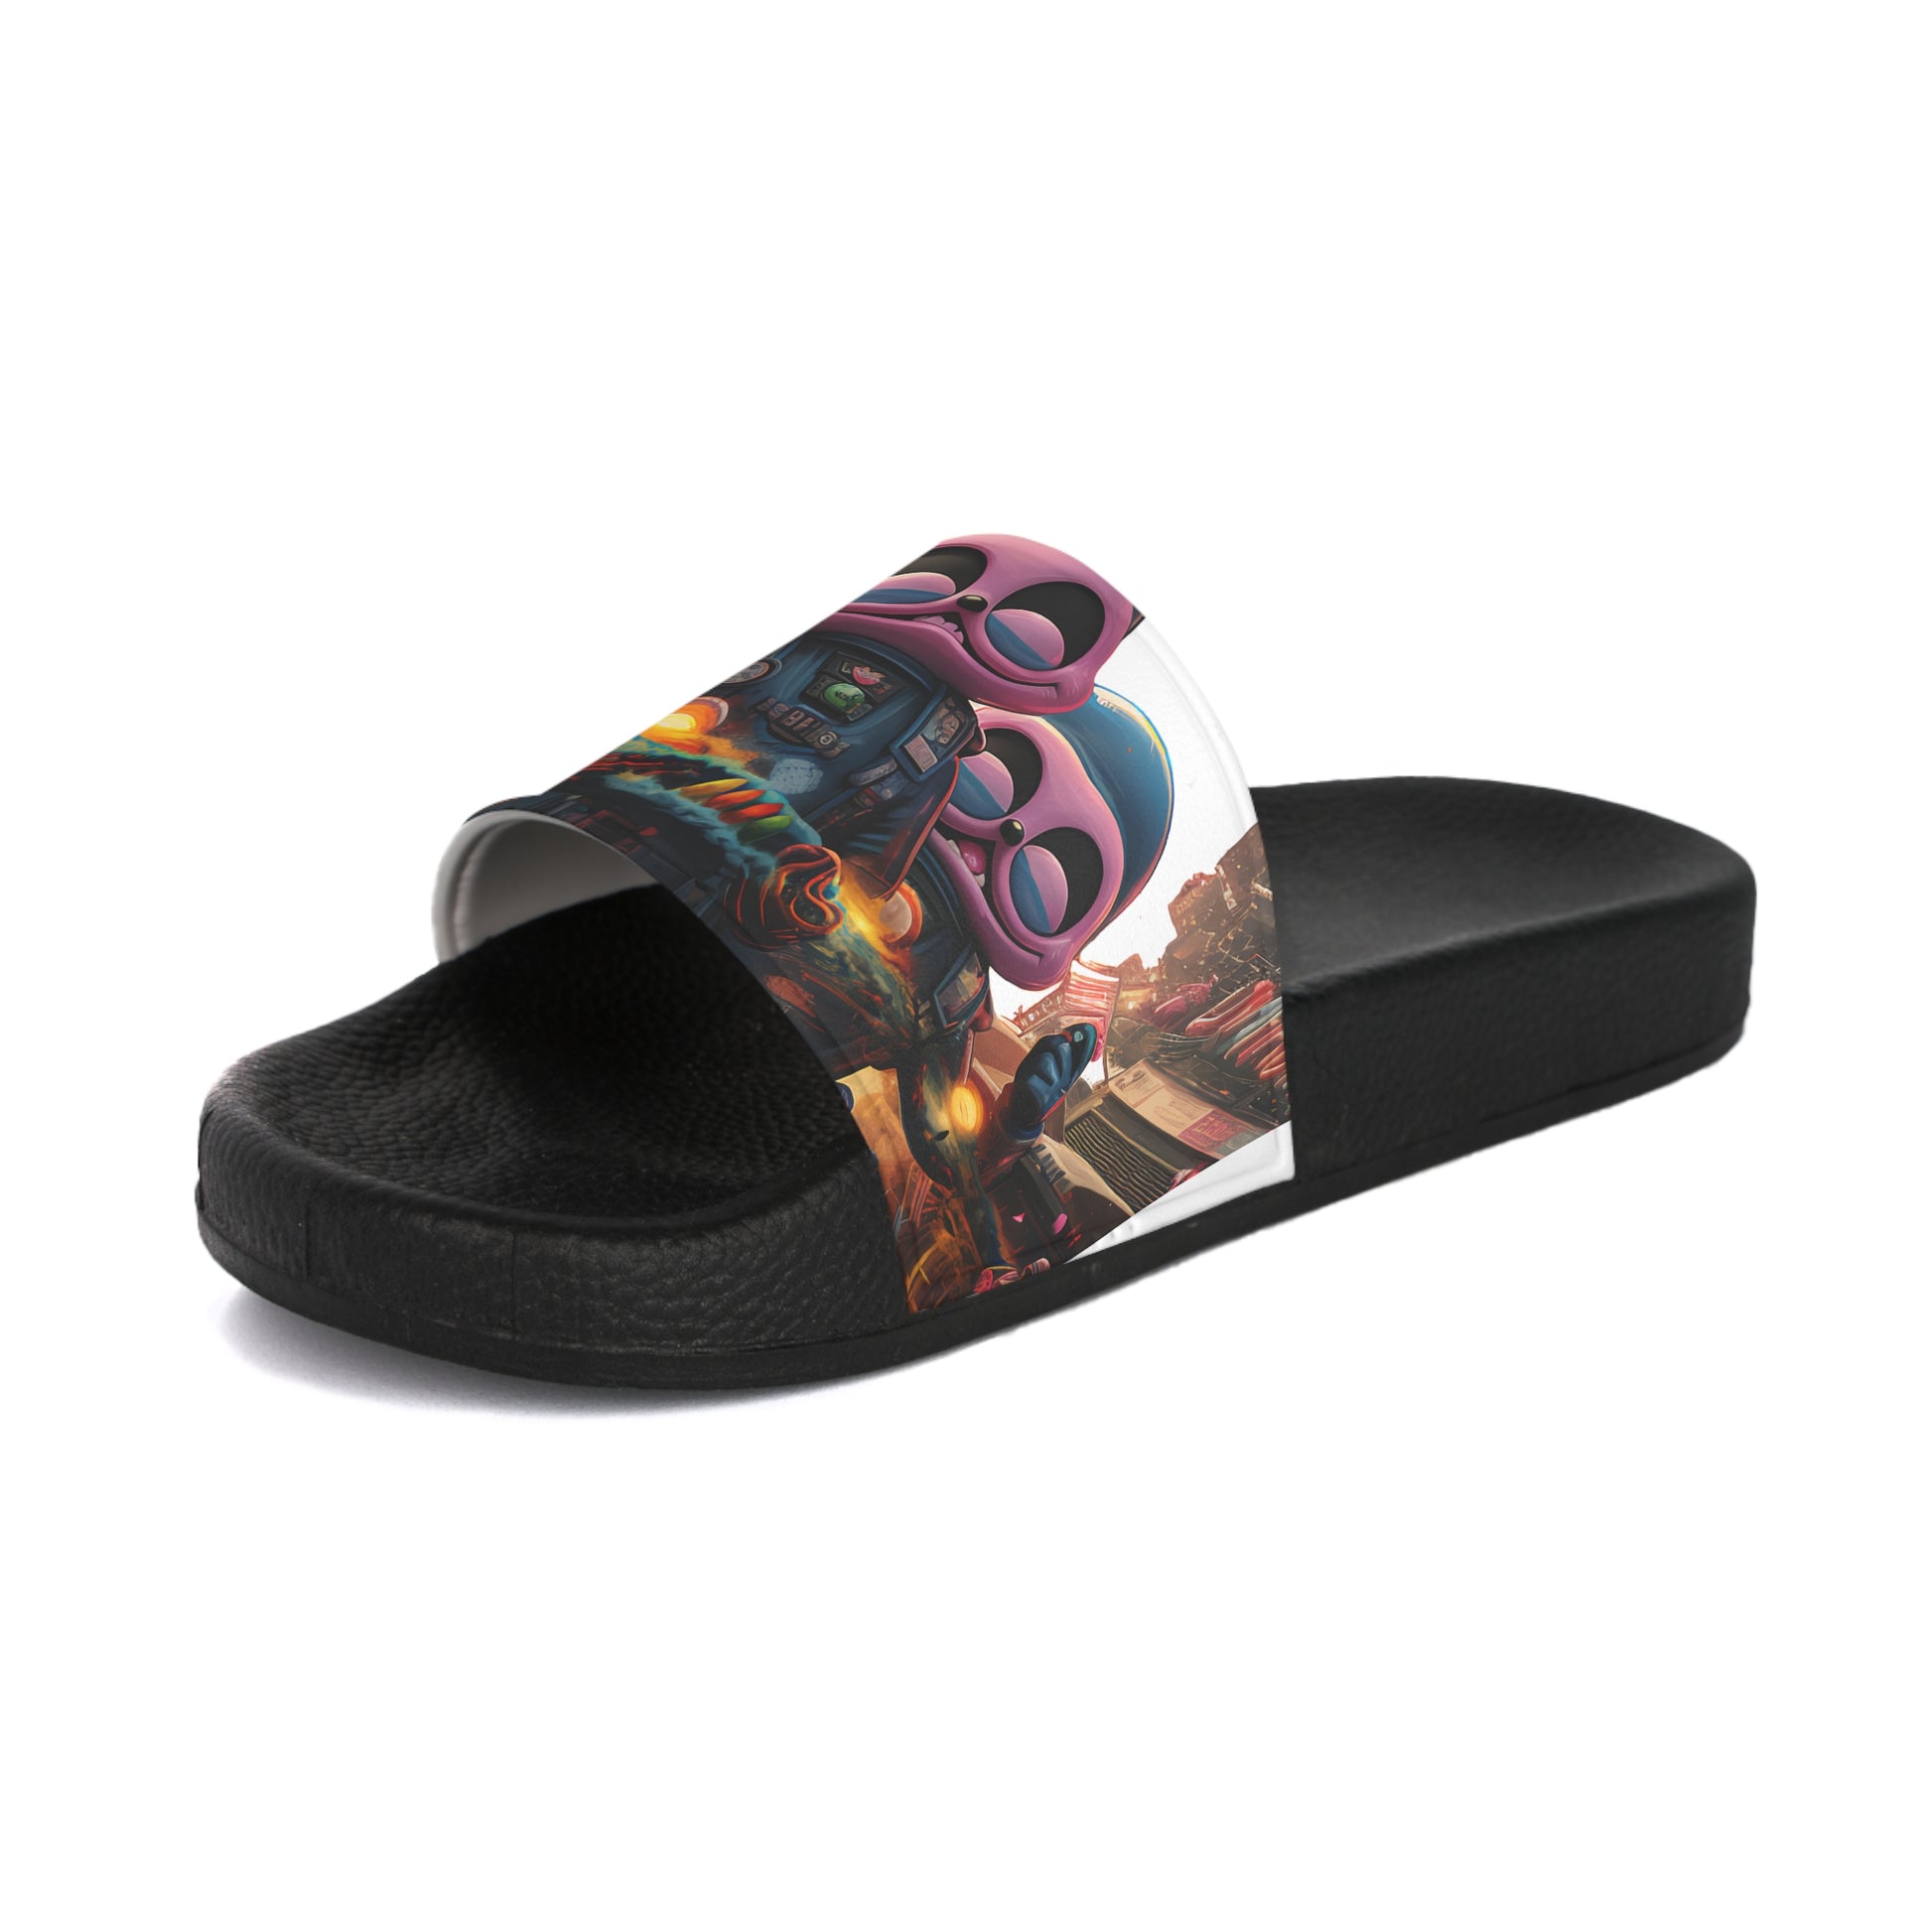 Step into surreal style with Pink Elephant Aliens: Beach Women's Slide Sandals. Aliens meet beach vibes, exclusively at Stashbox.ai.